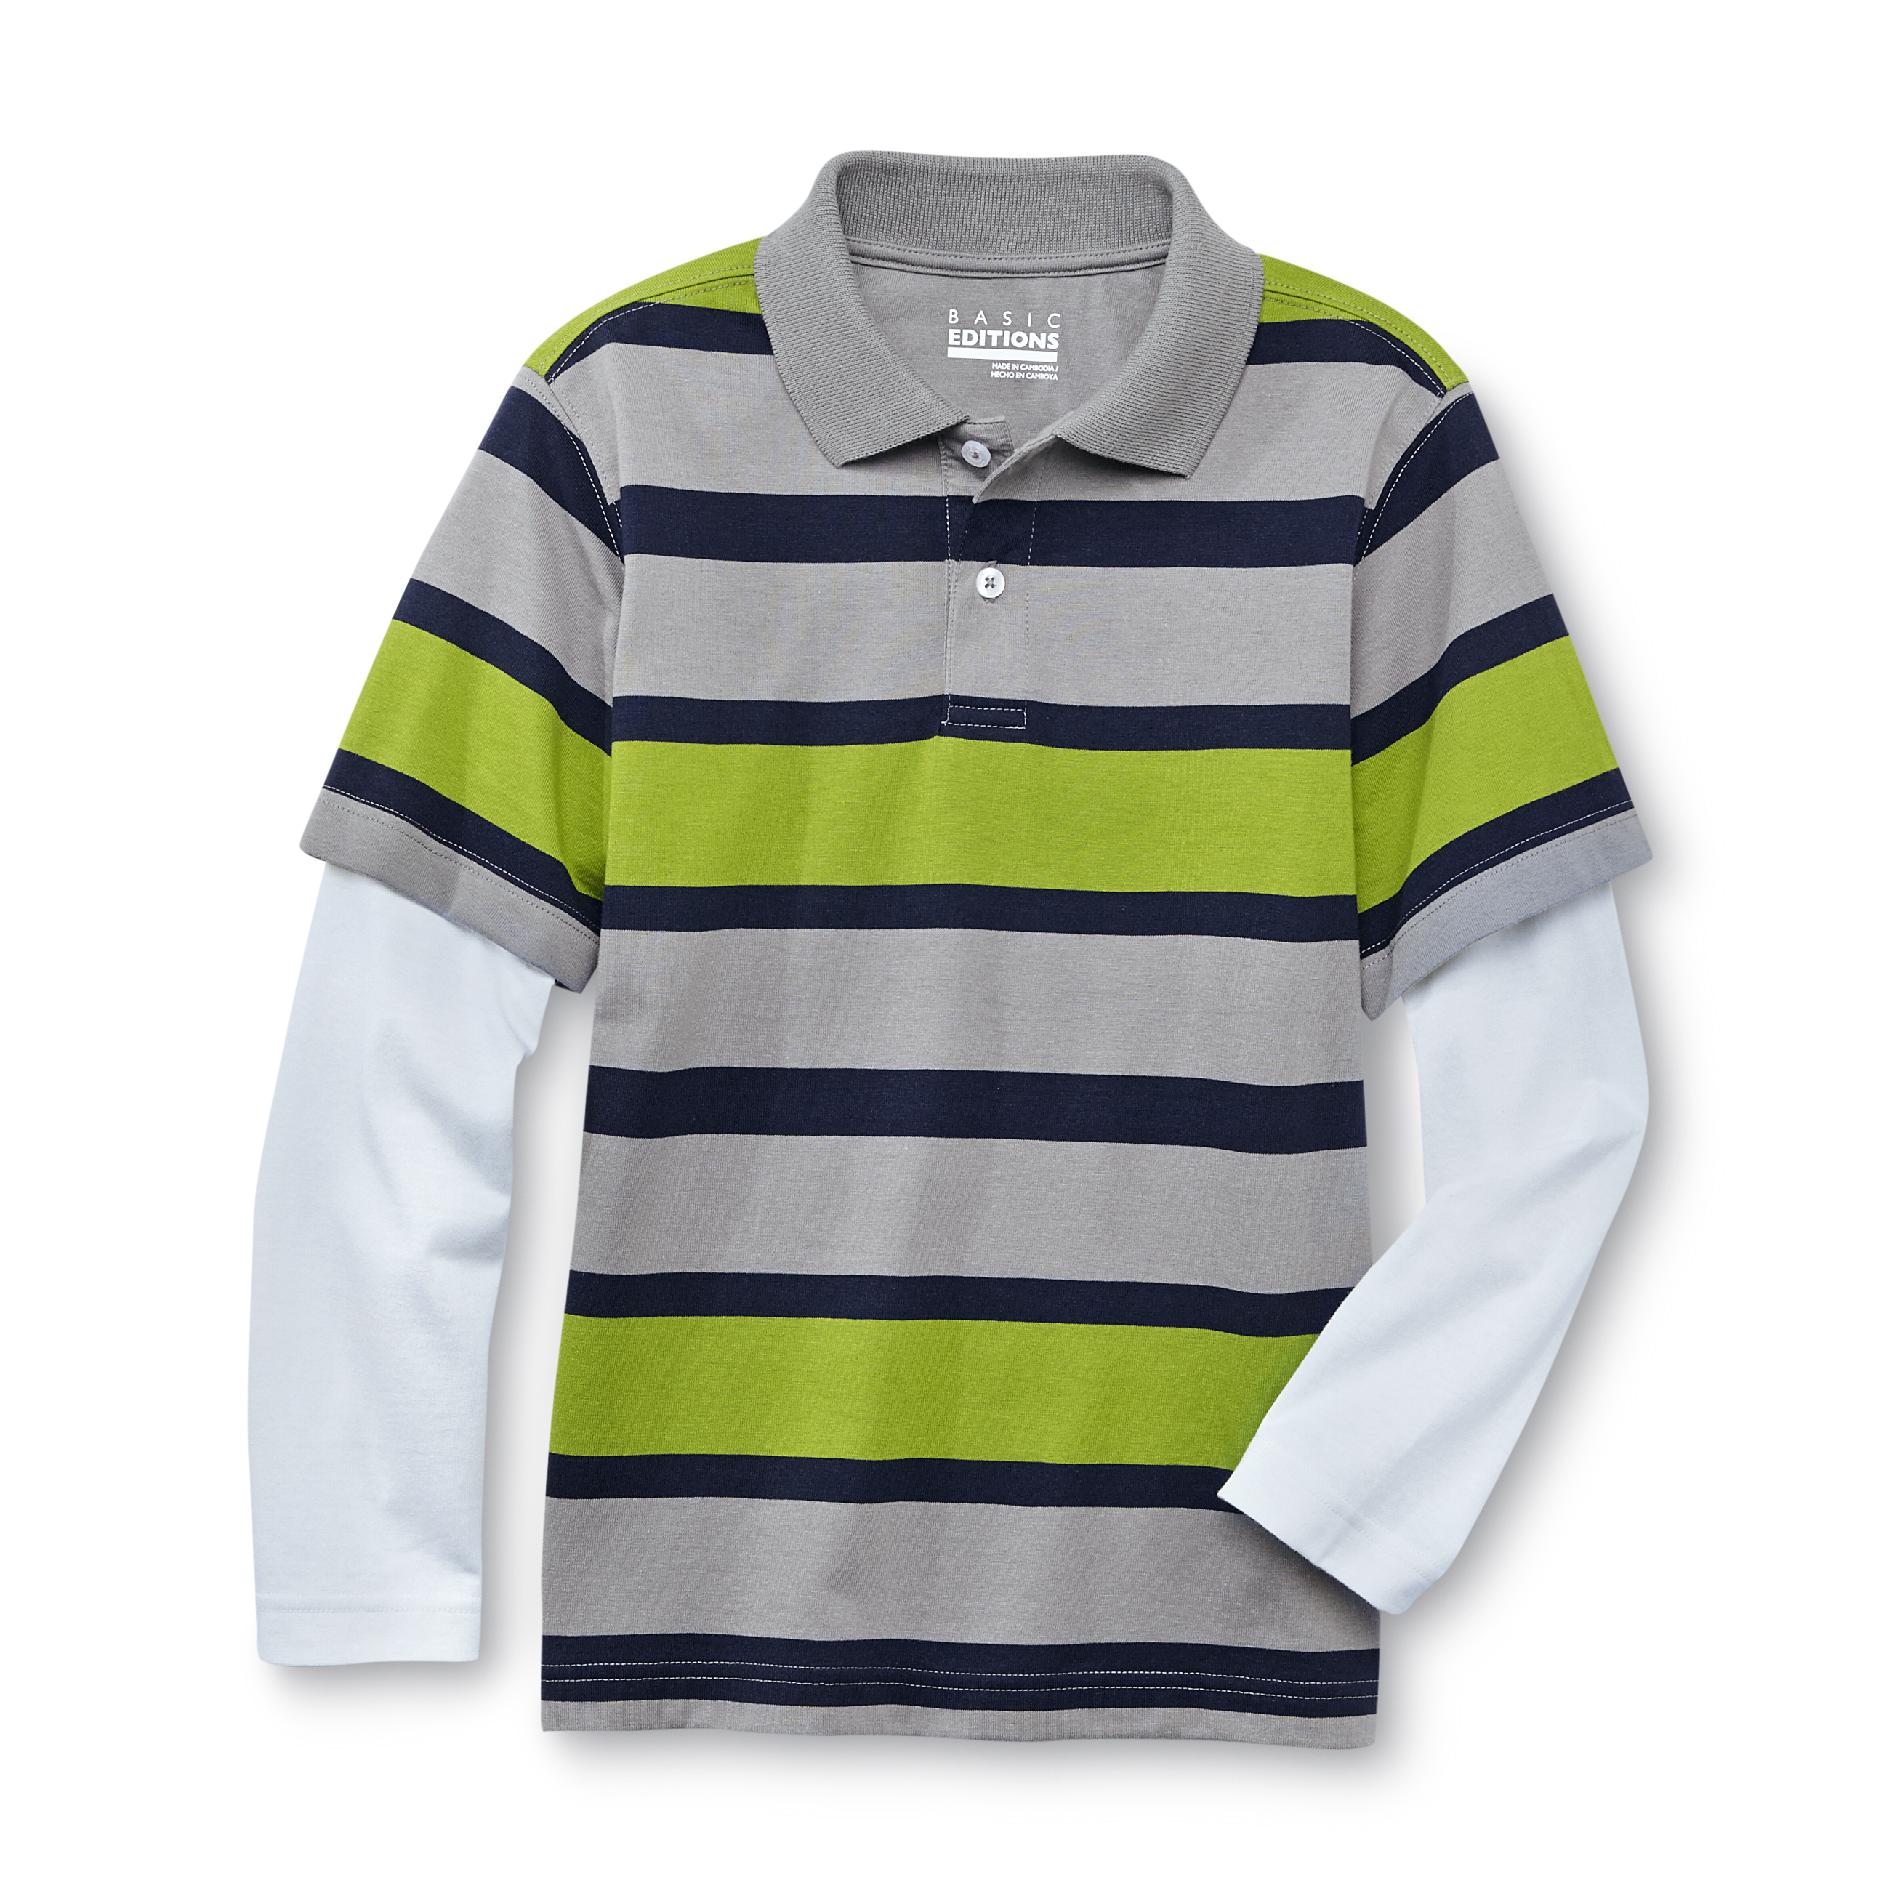 Basic Editions Boy's Layered-Look Polo Shirt - Striped